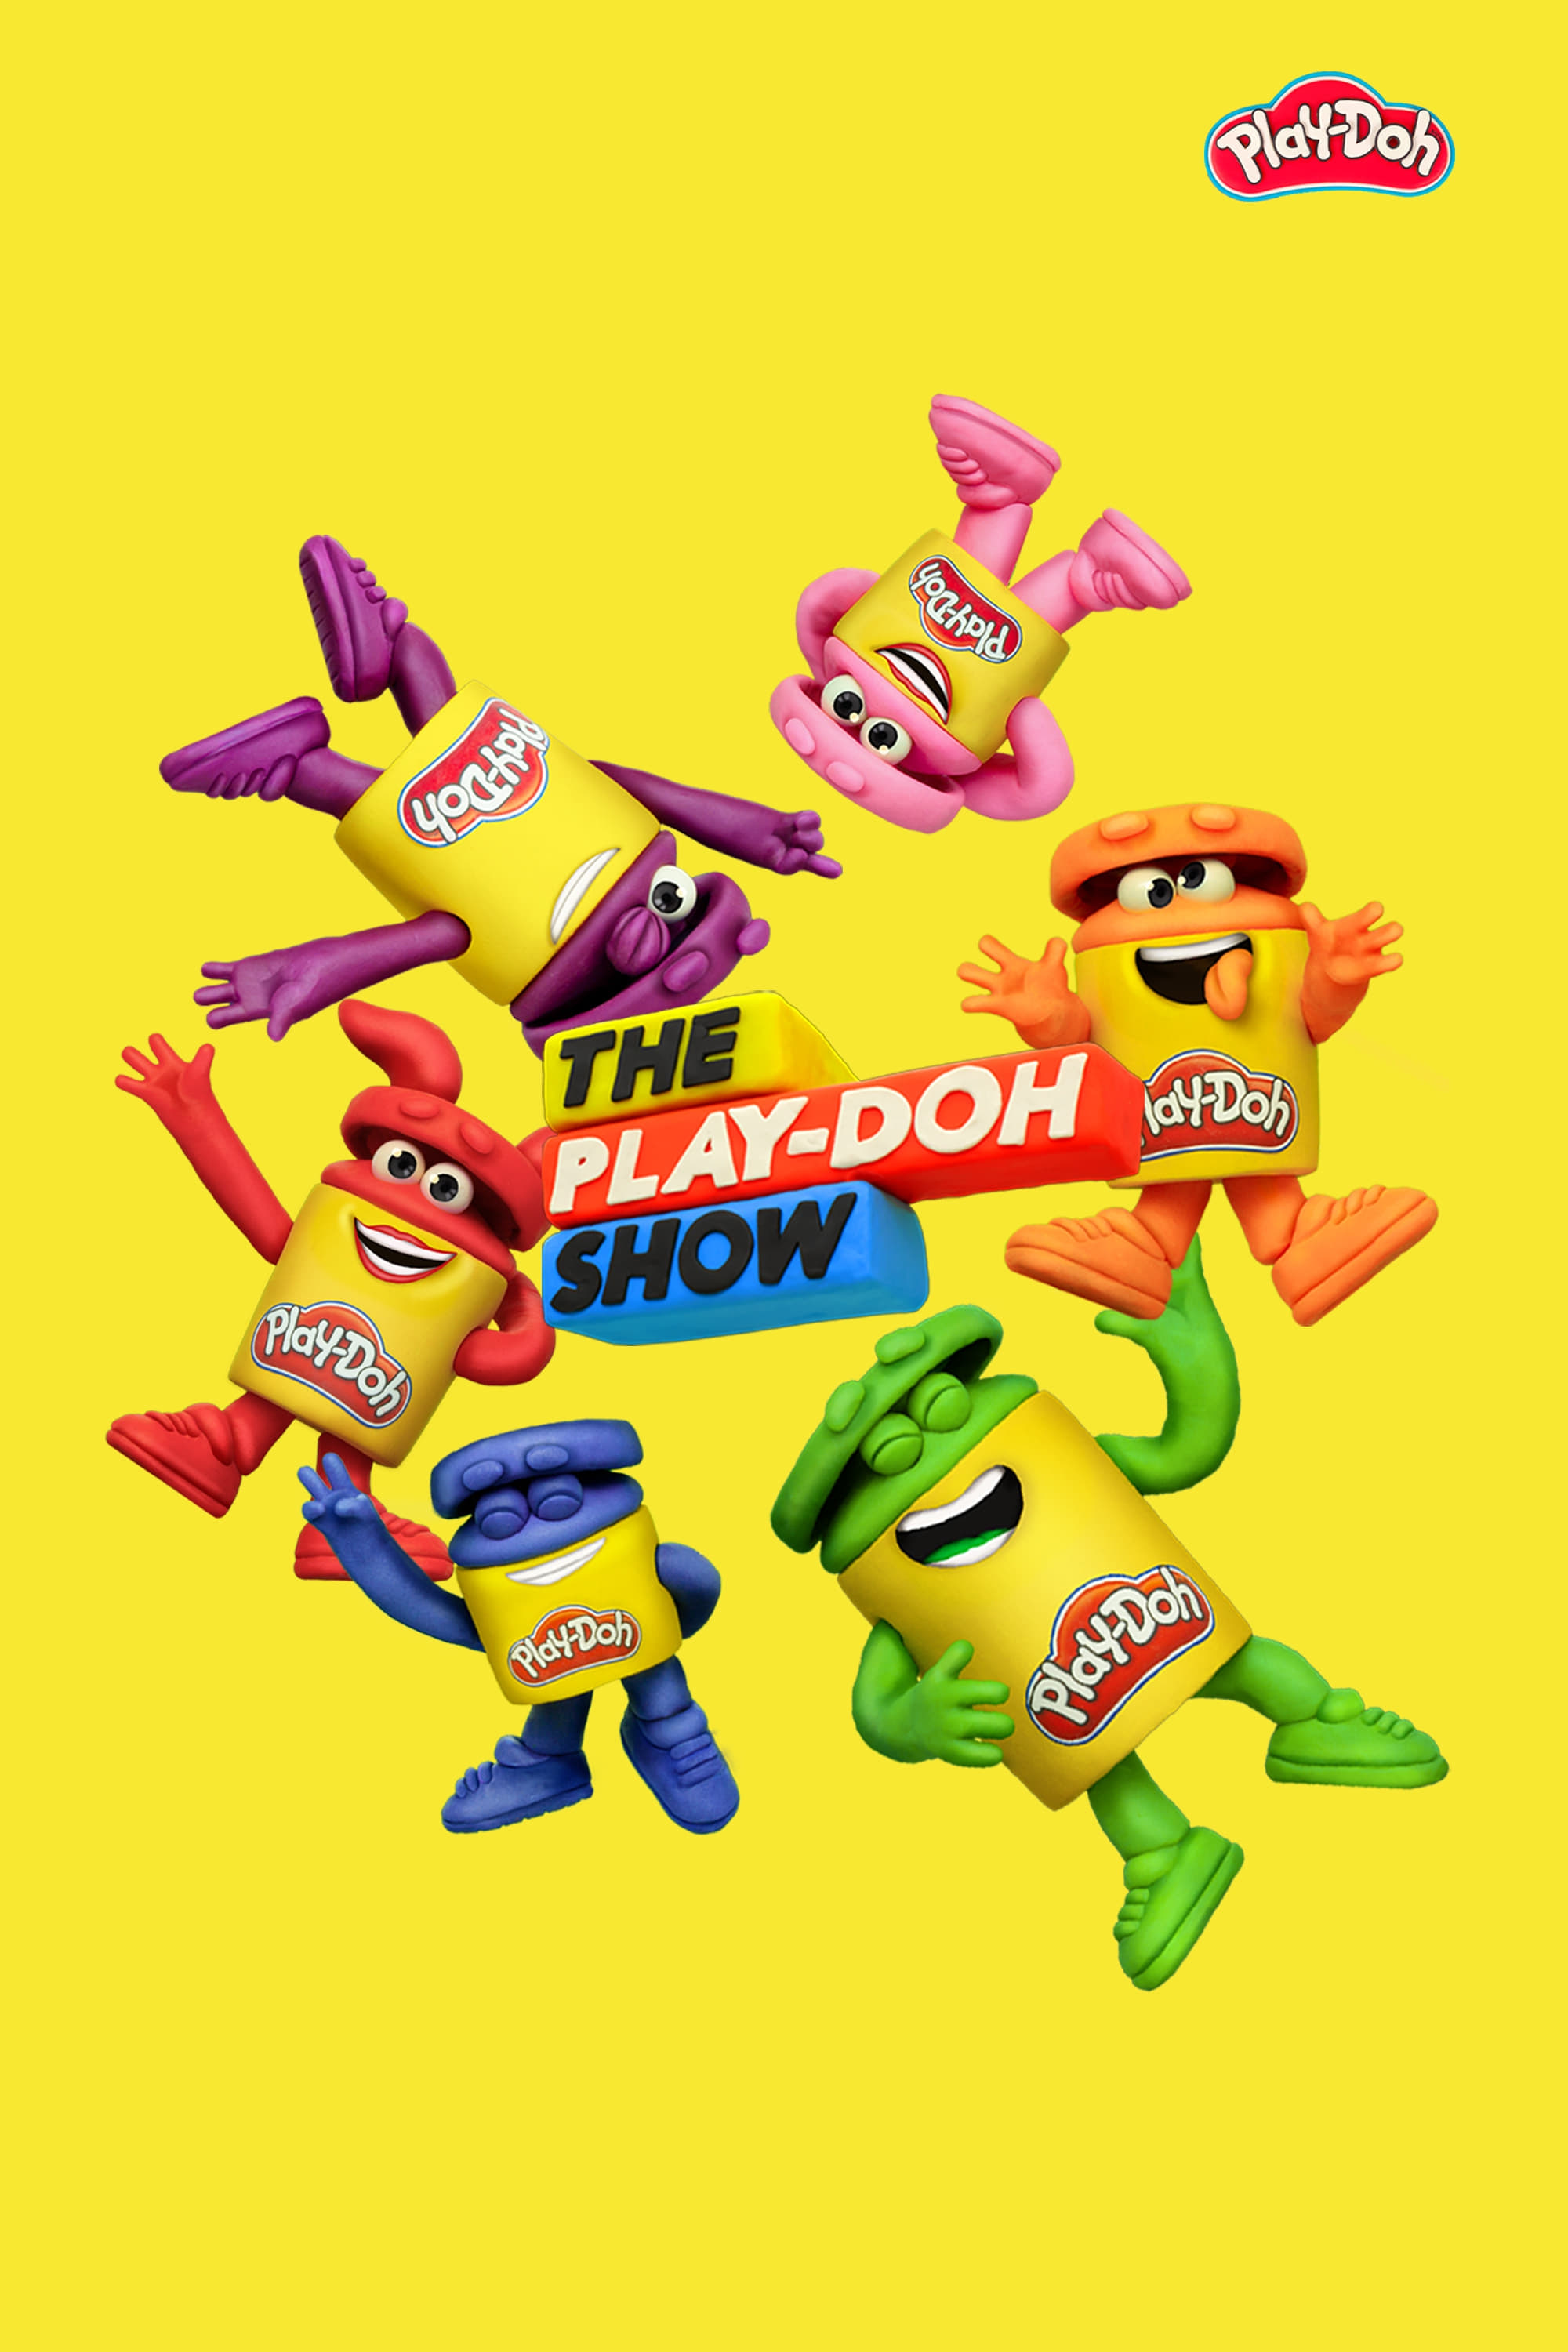 The Play-Doh Show